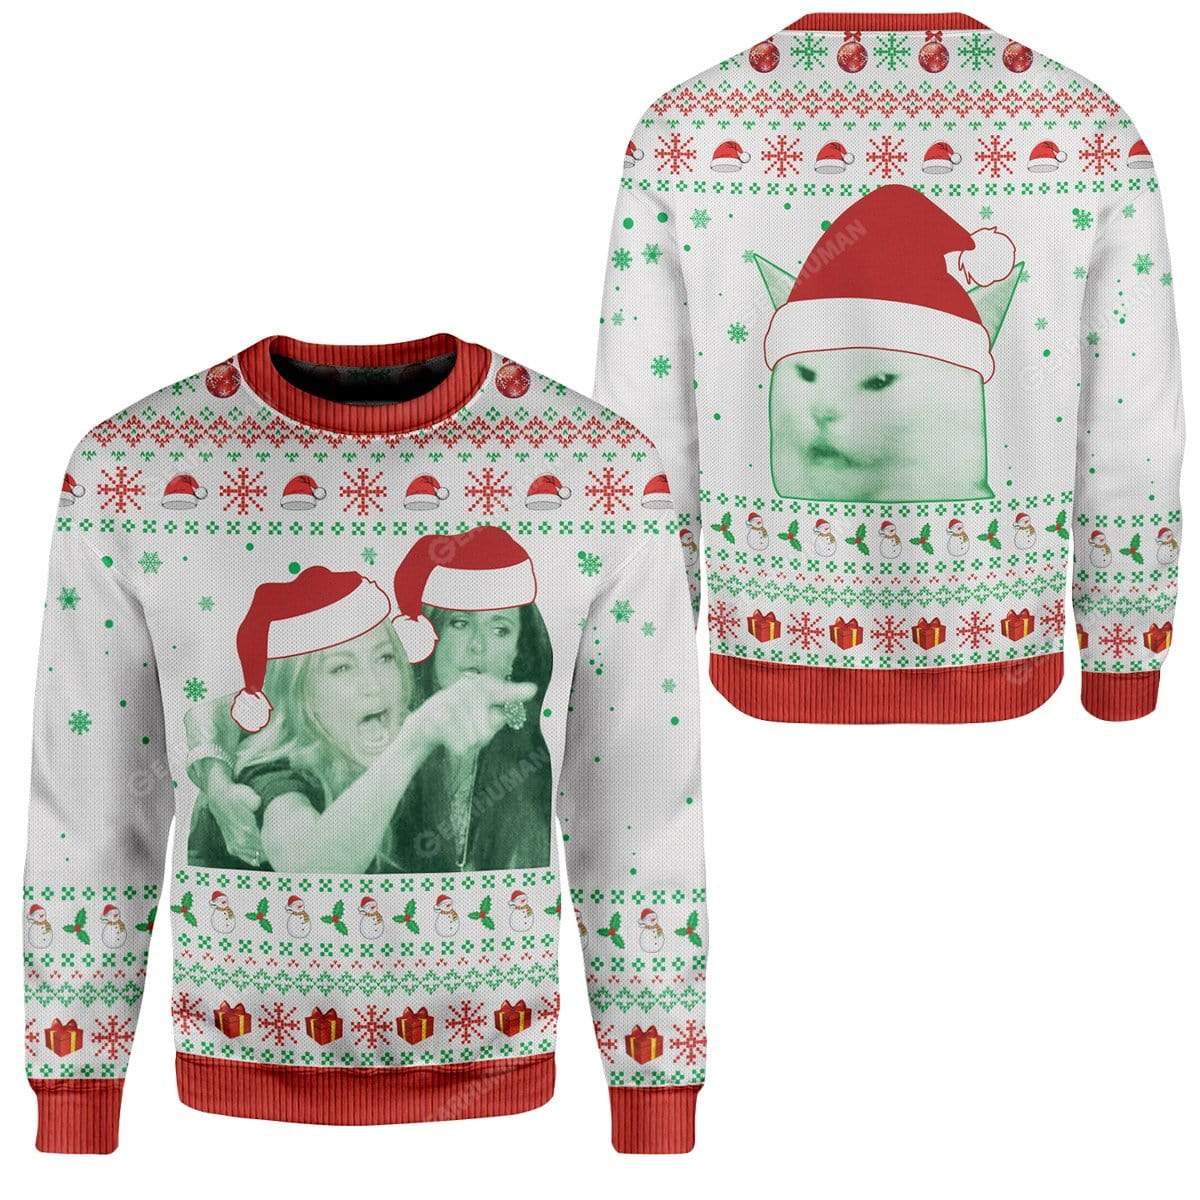 Ugly Woman Yelling At A Cat Custom Sweater Apparel HD-GH20111919 Ugly Christmas Sweater 